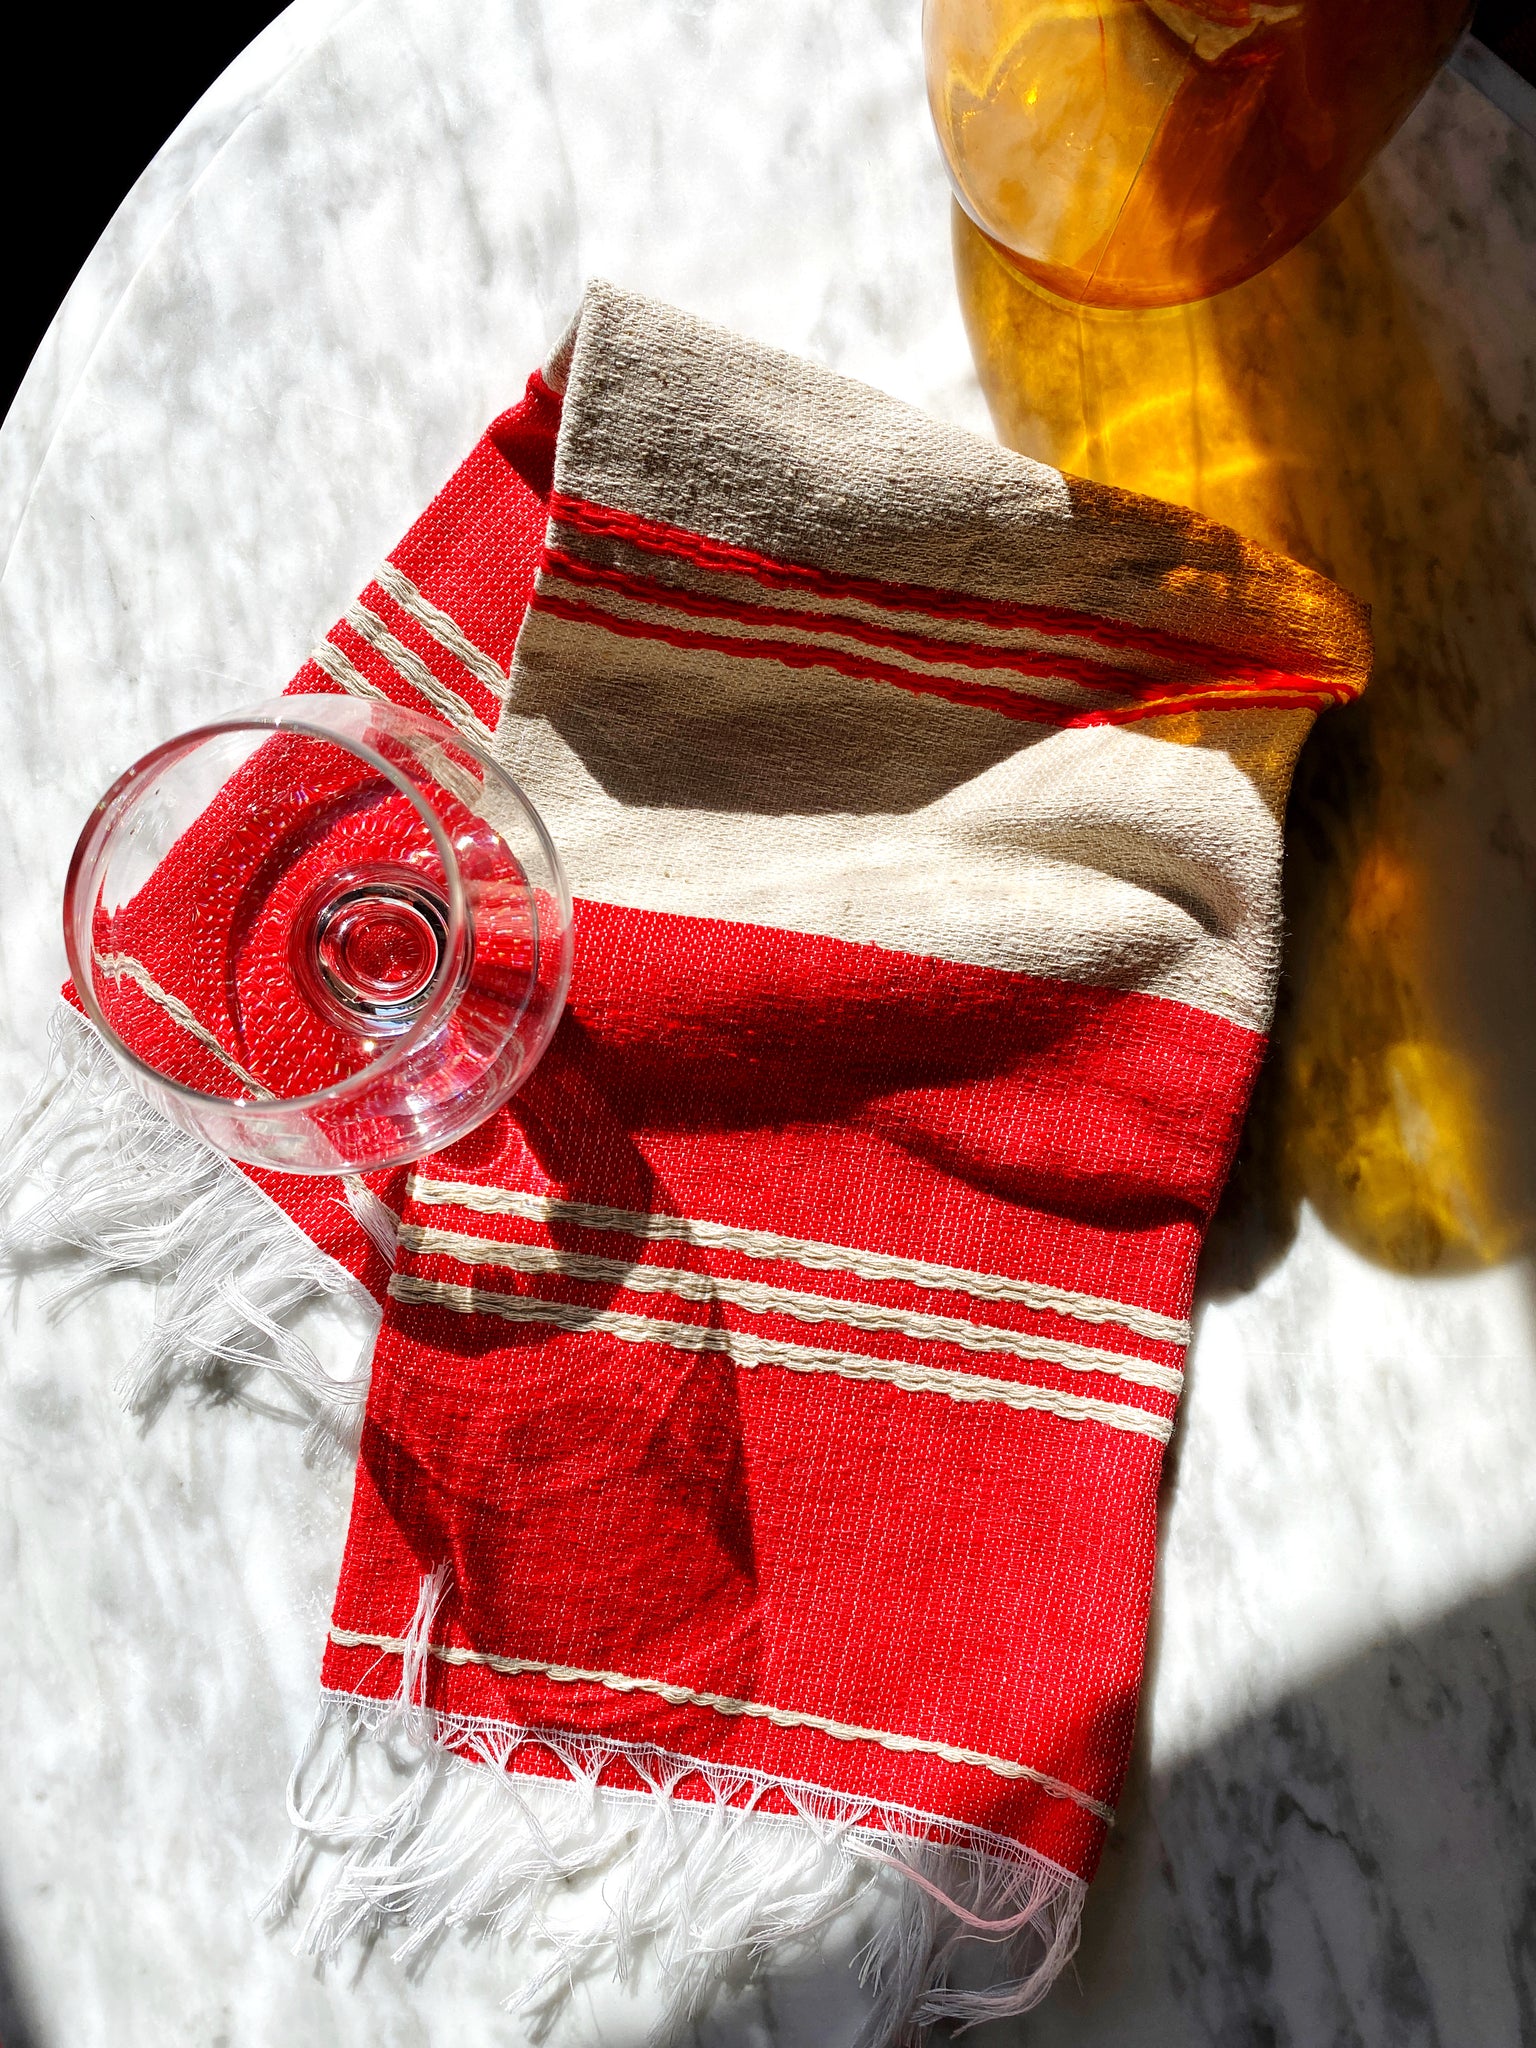 Classic Striped Cotton Hand Towel - Corazon Red + Natural